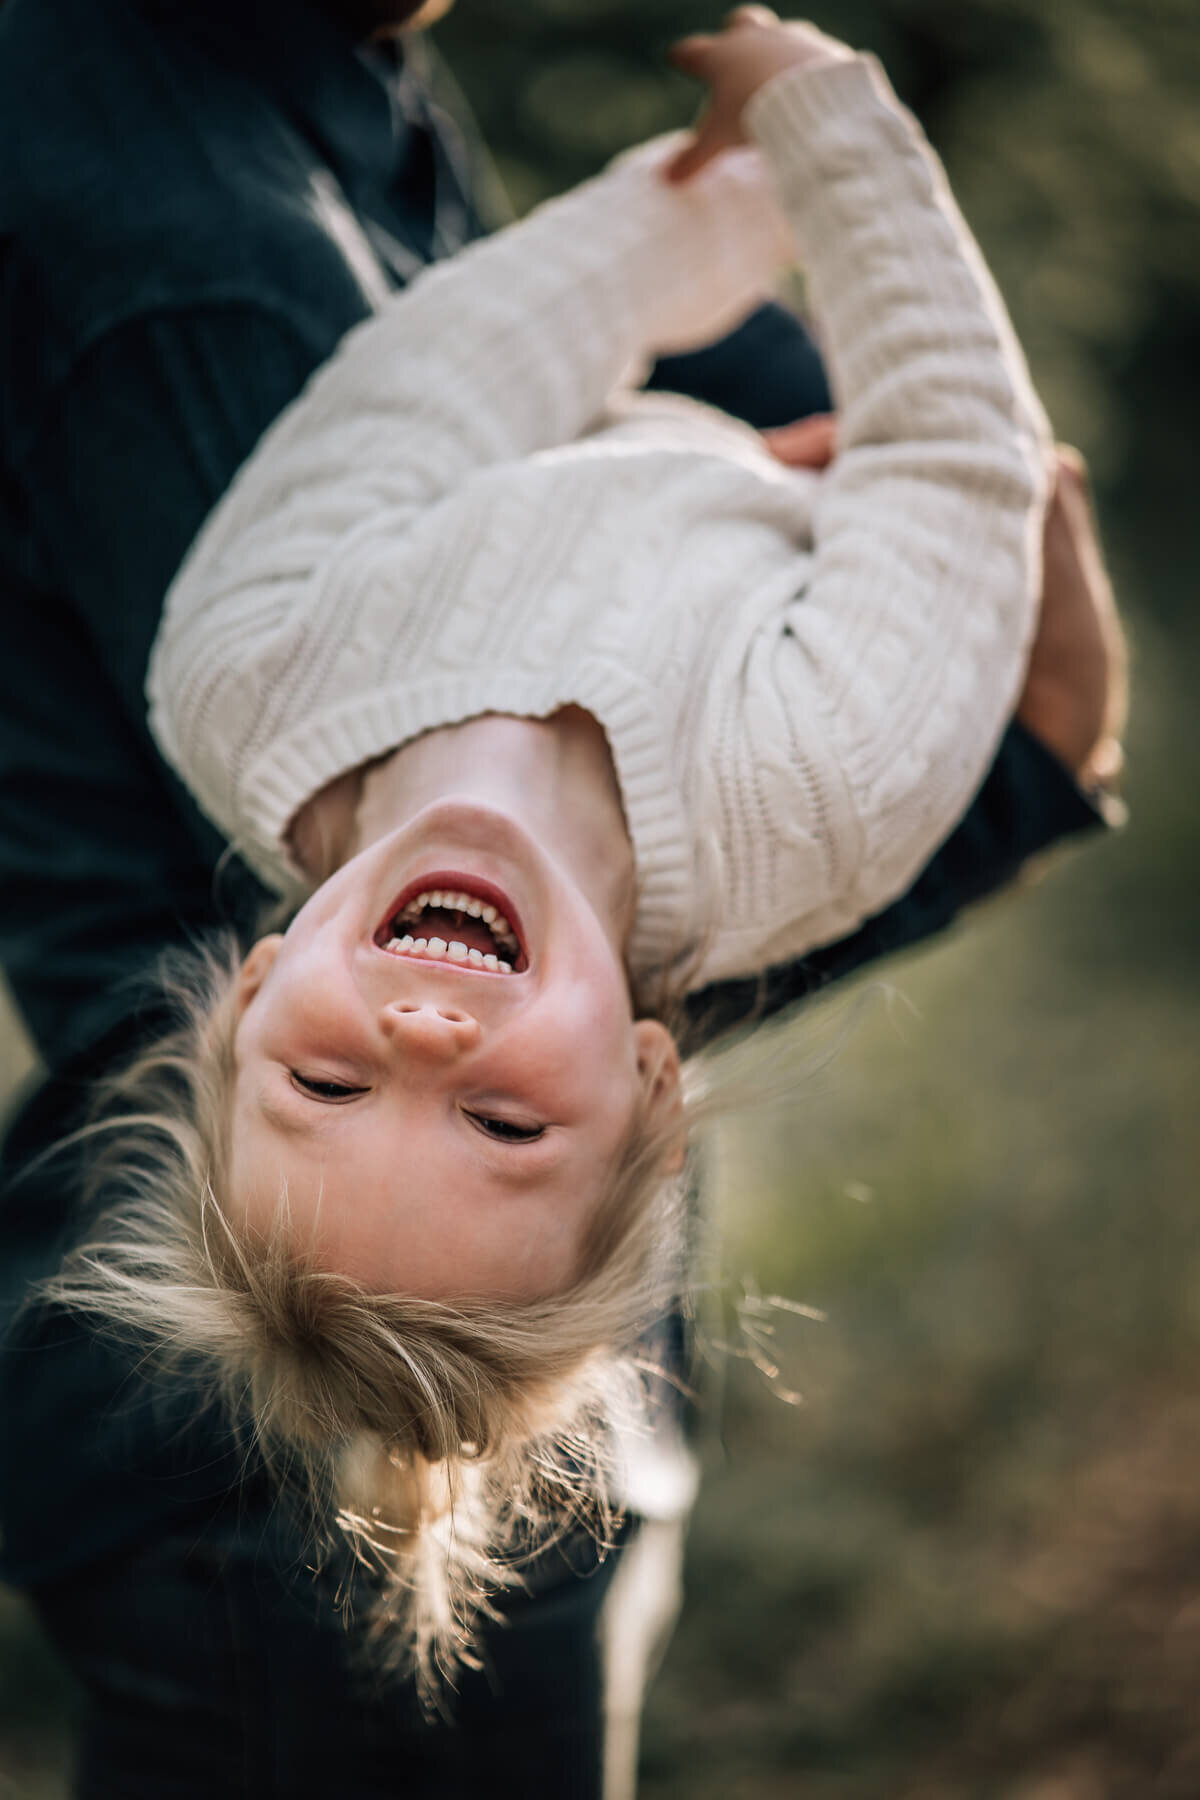 A close up photo of a little girl laughing while being held upside down by her father.